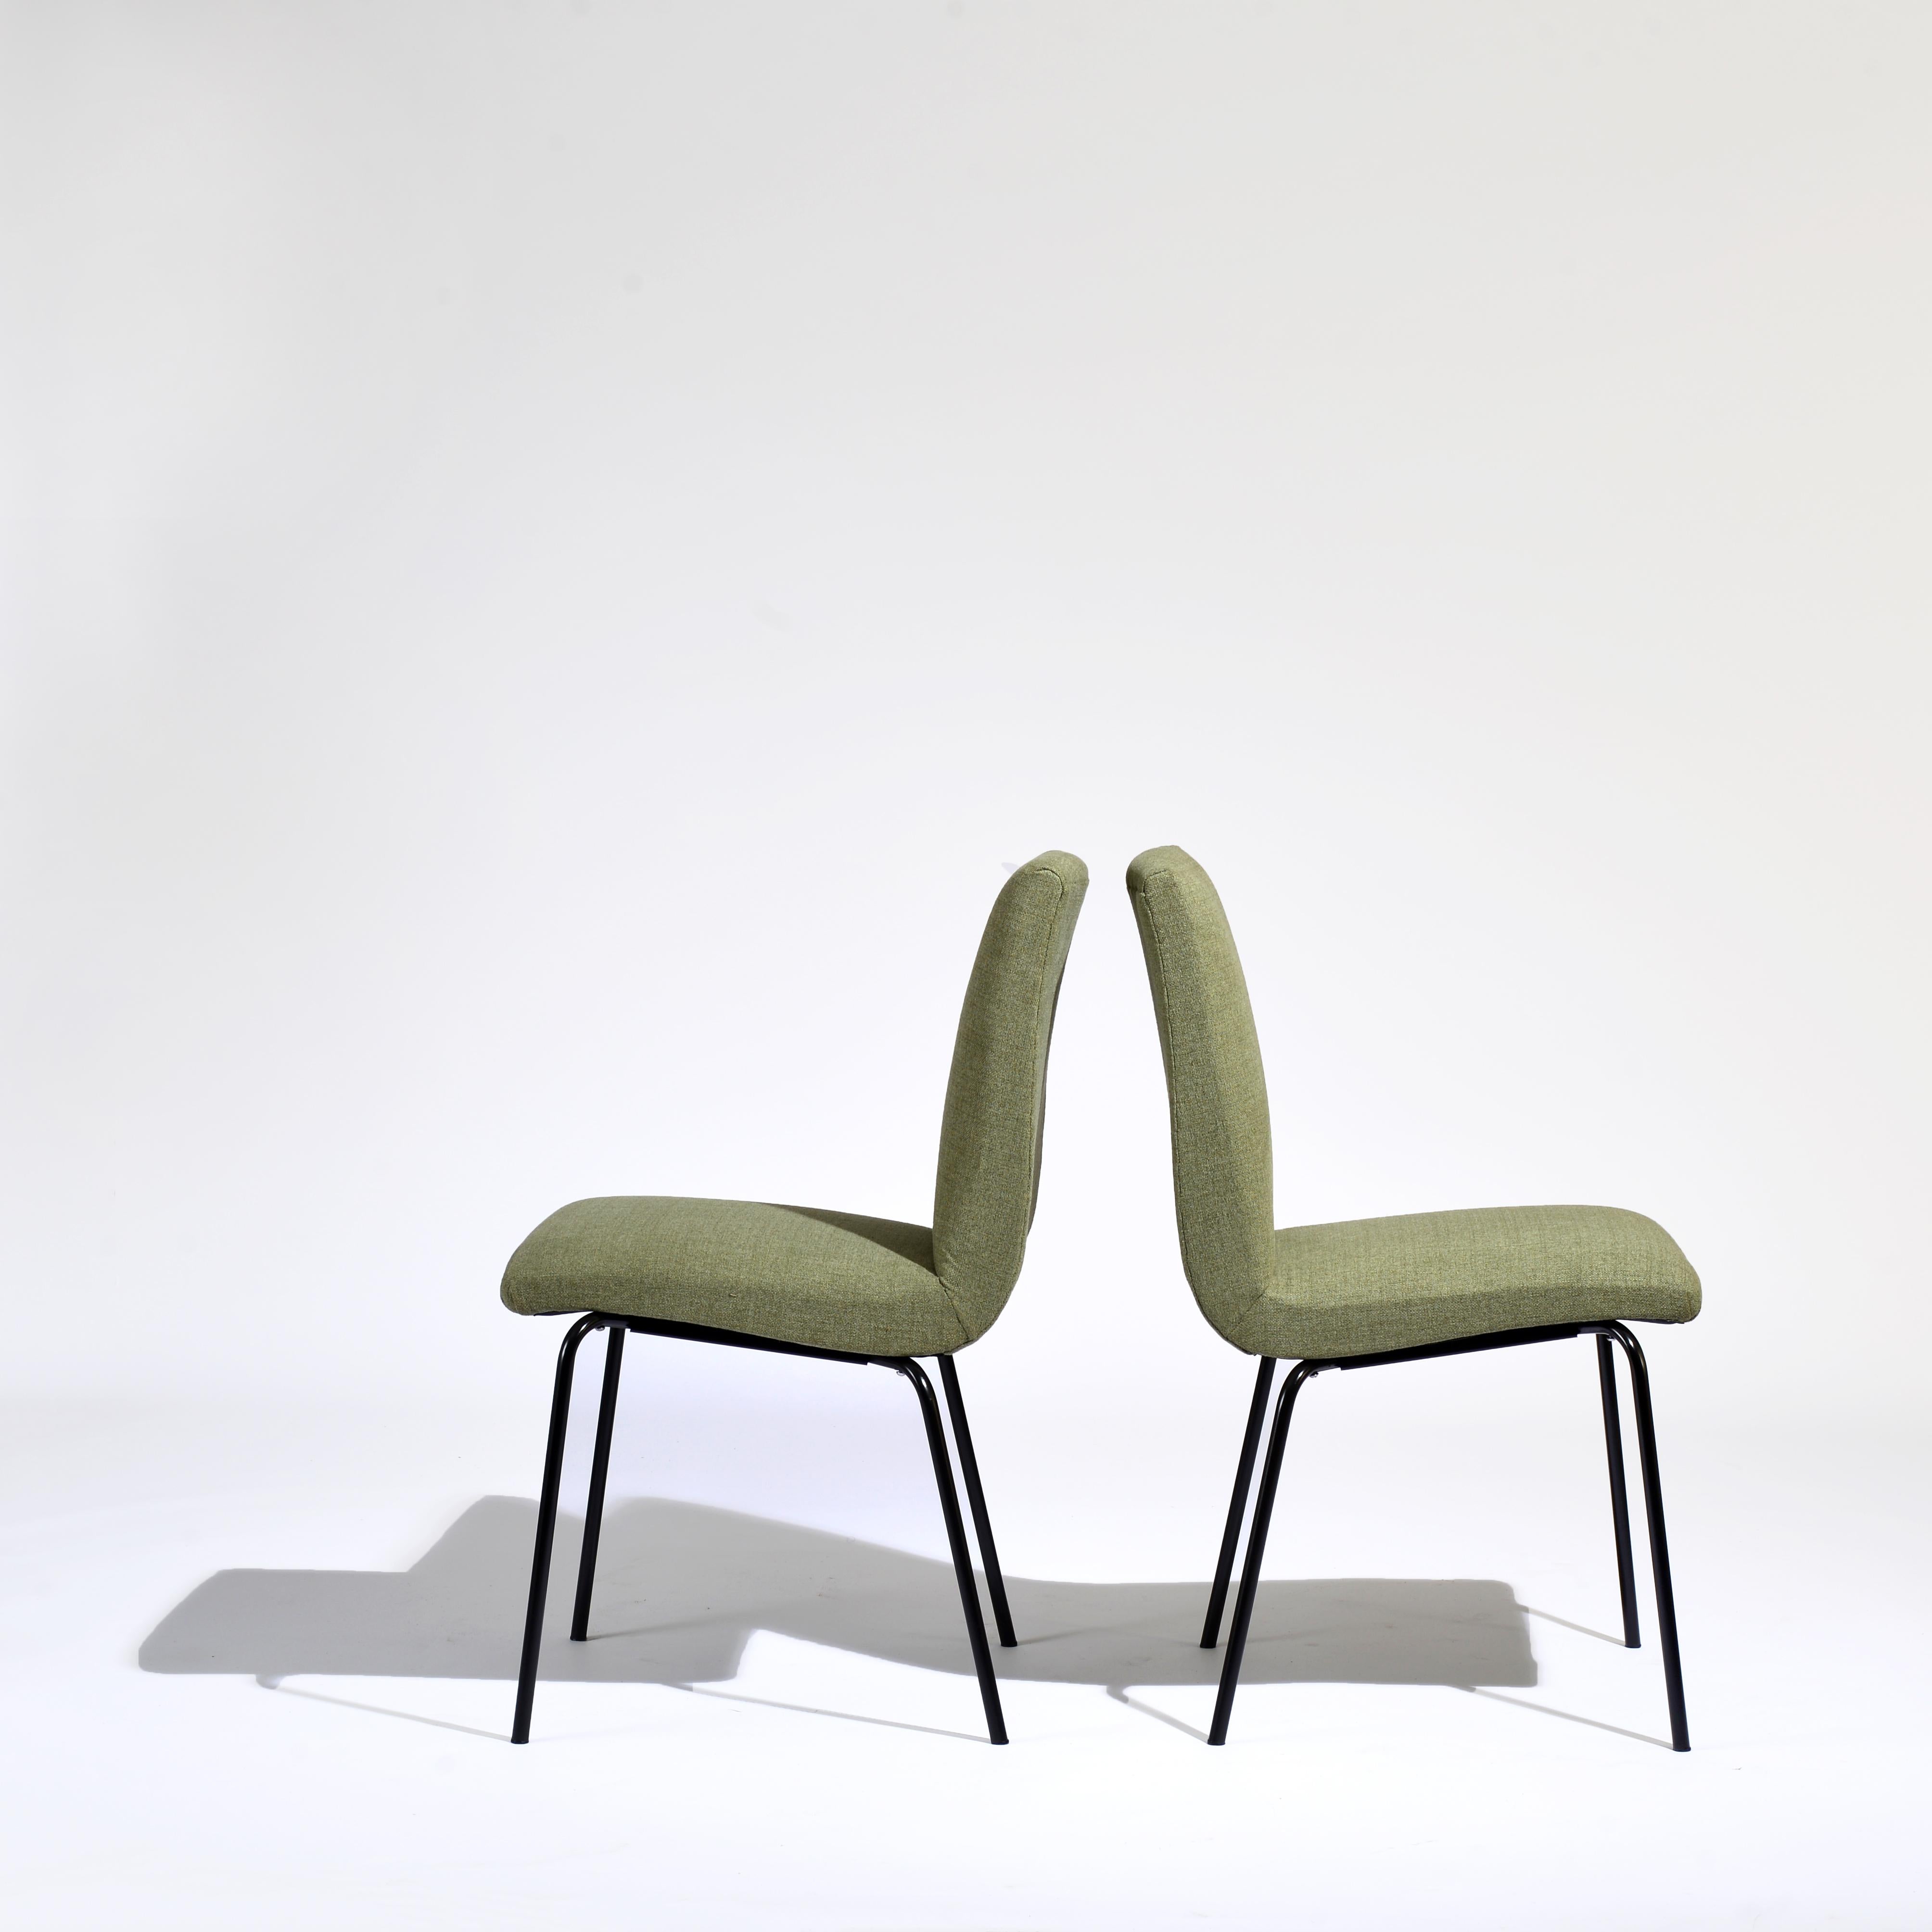 Pair of chairs, design by Pierre Guariche, published by Meurop in the 60s, from the series called 